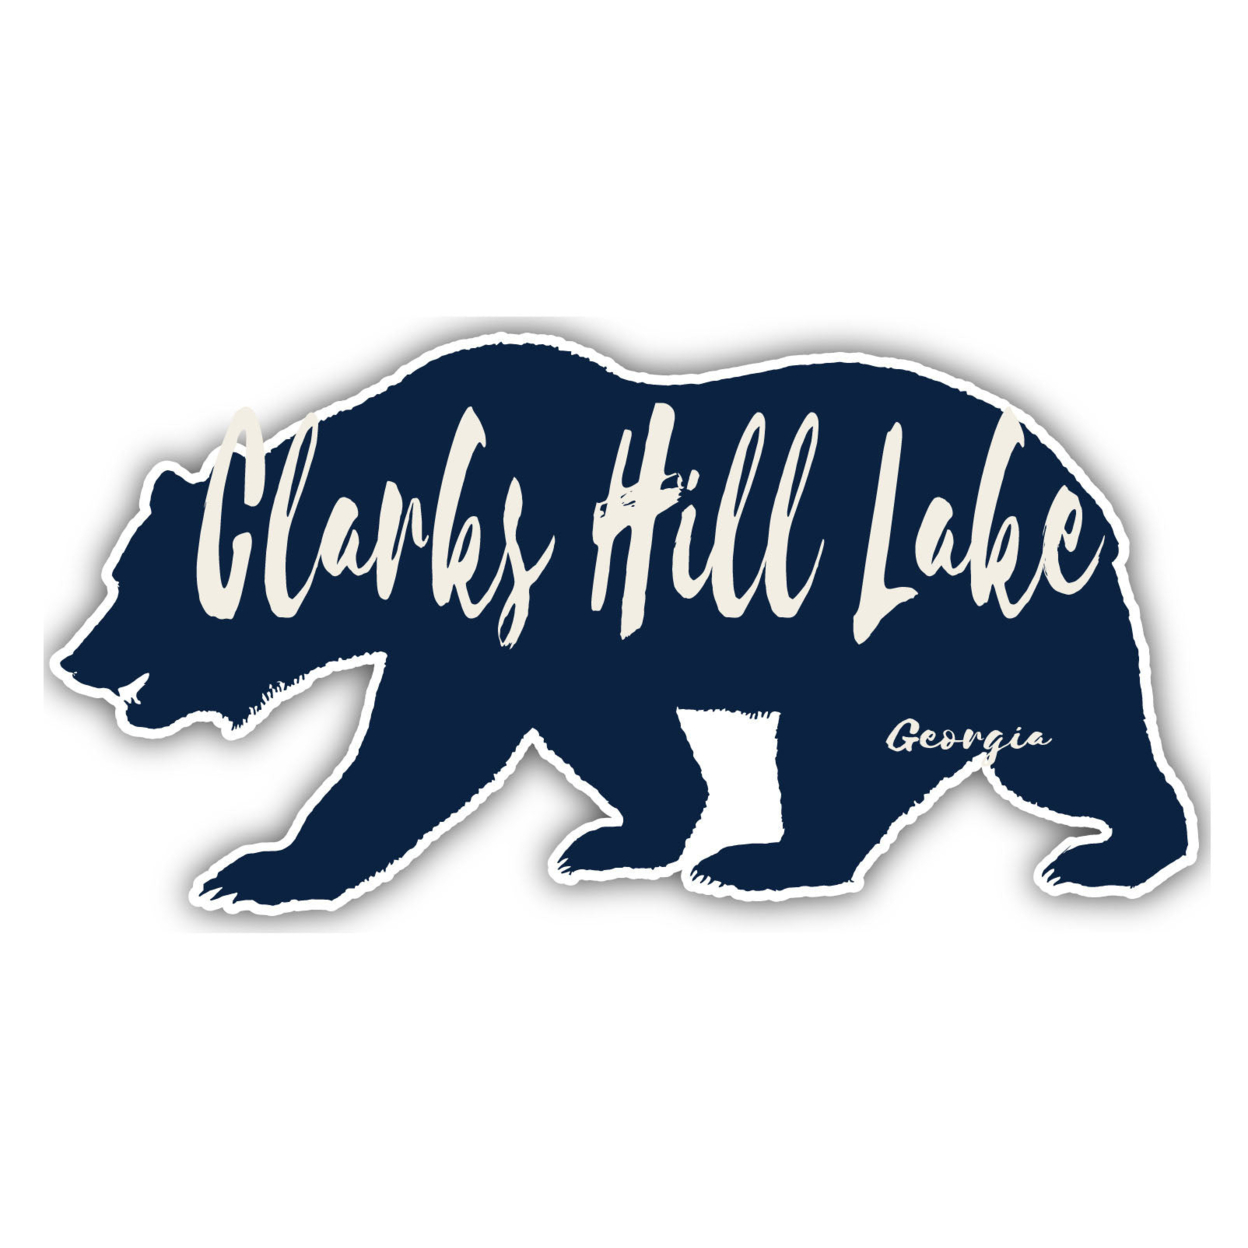 Clarks Hill Lake Georgia Souvenir Decorative Stickers (Choose Theme And Size) - 4-Pack, 8-Inch, Camp Life